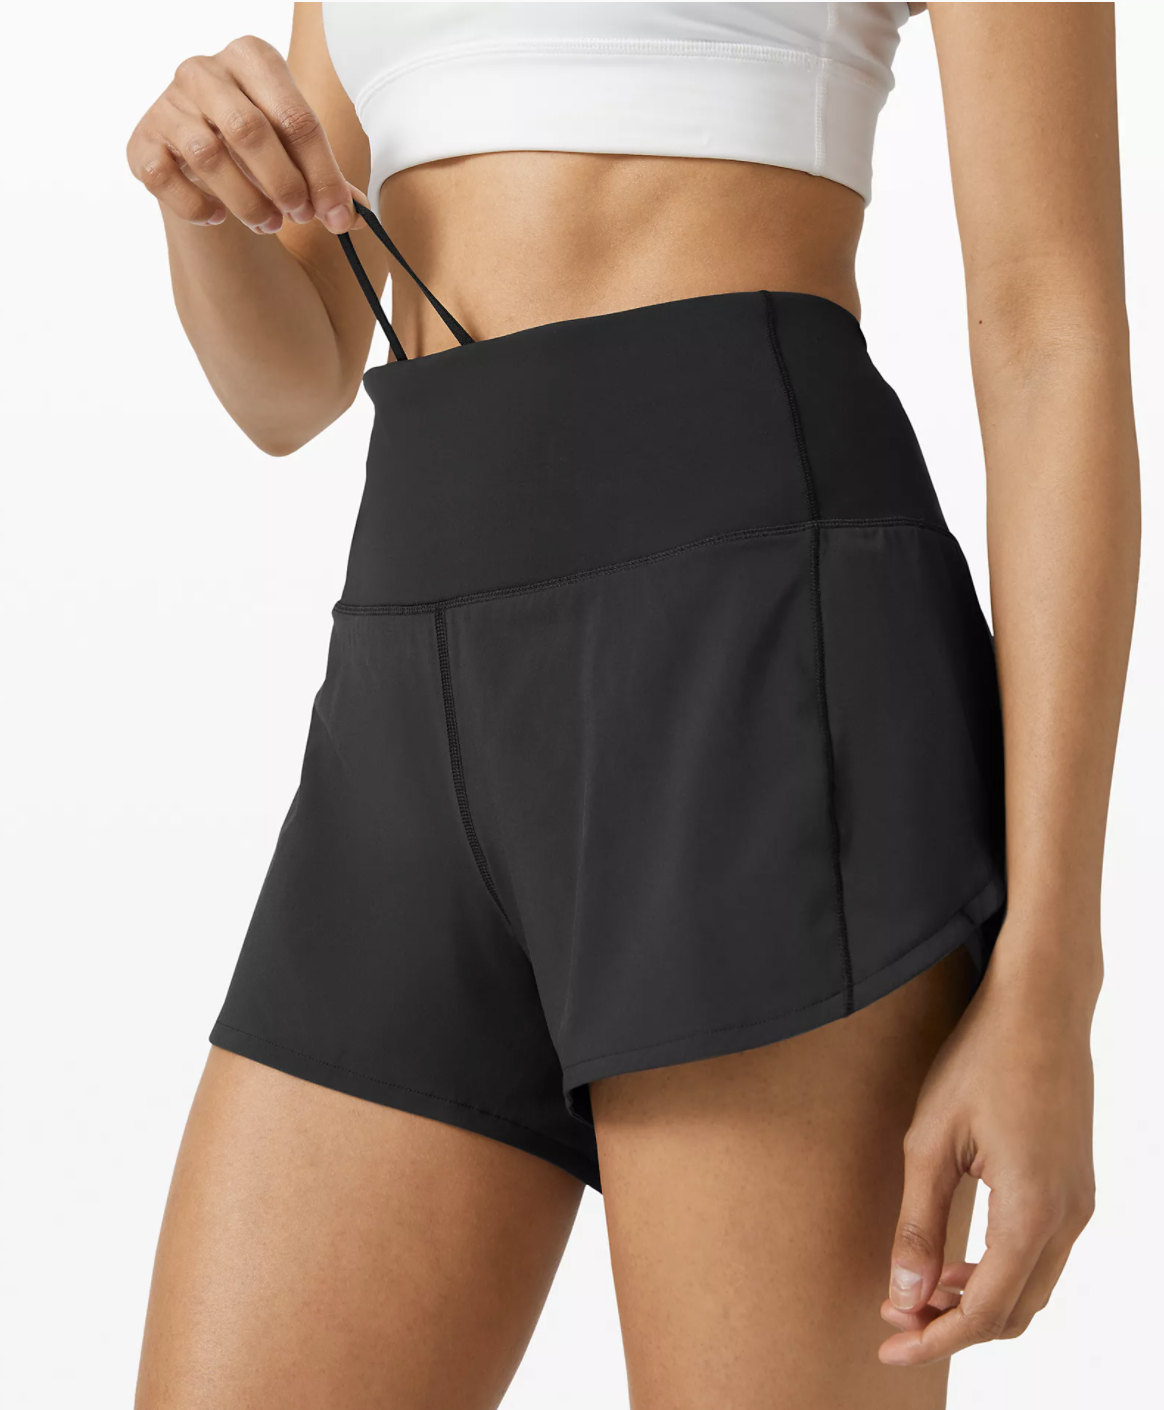 Shop Lululemon from Canada and Ship to Malaysia | Buyandship Malaysia